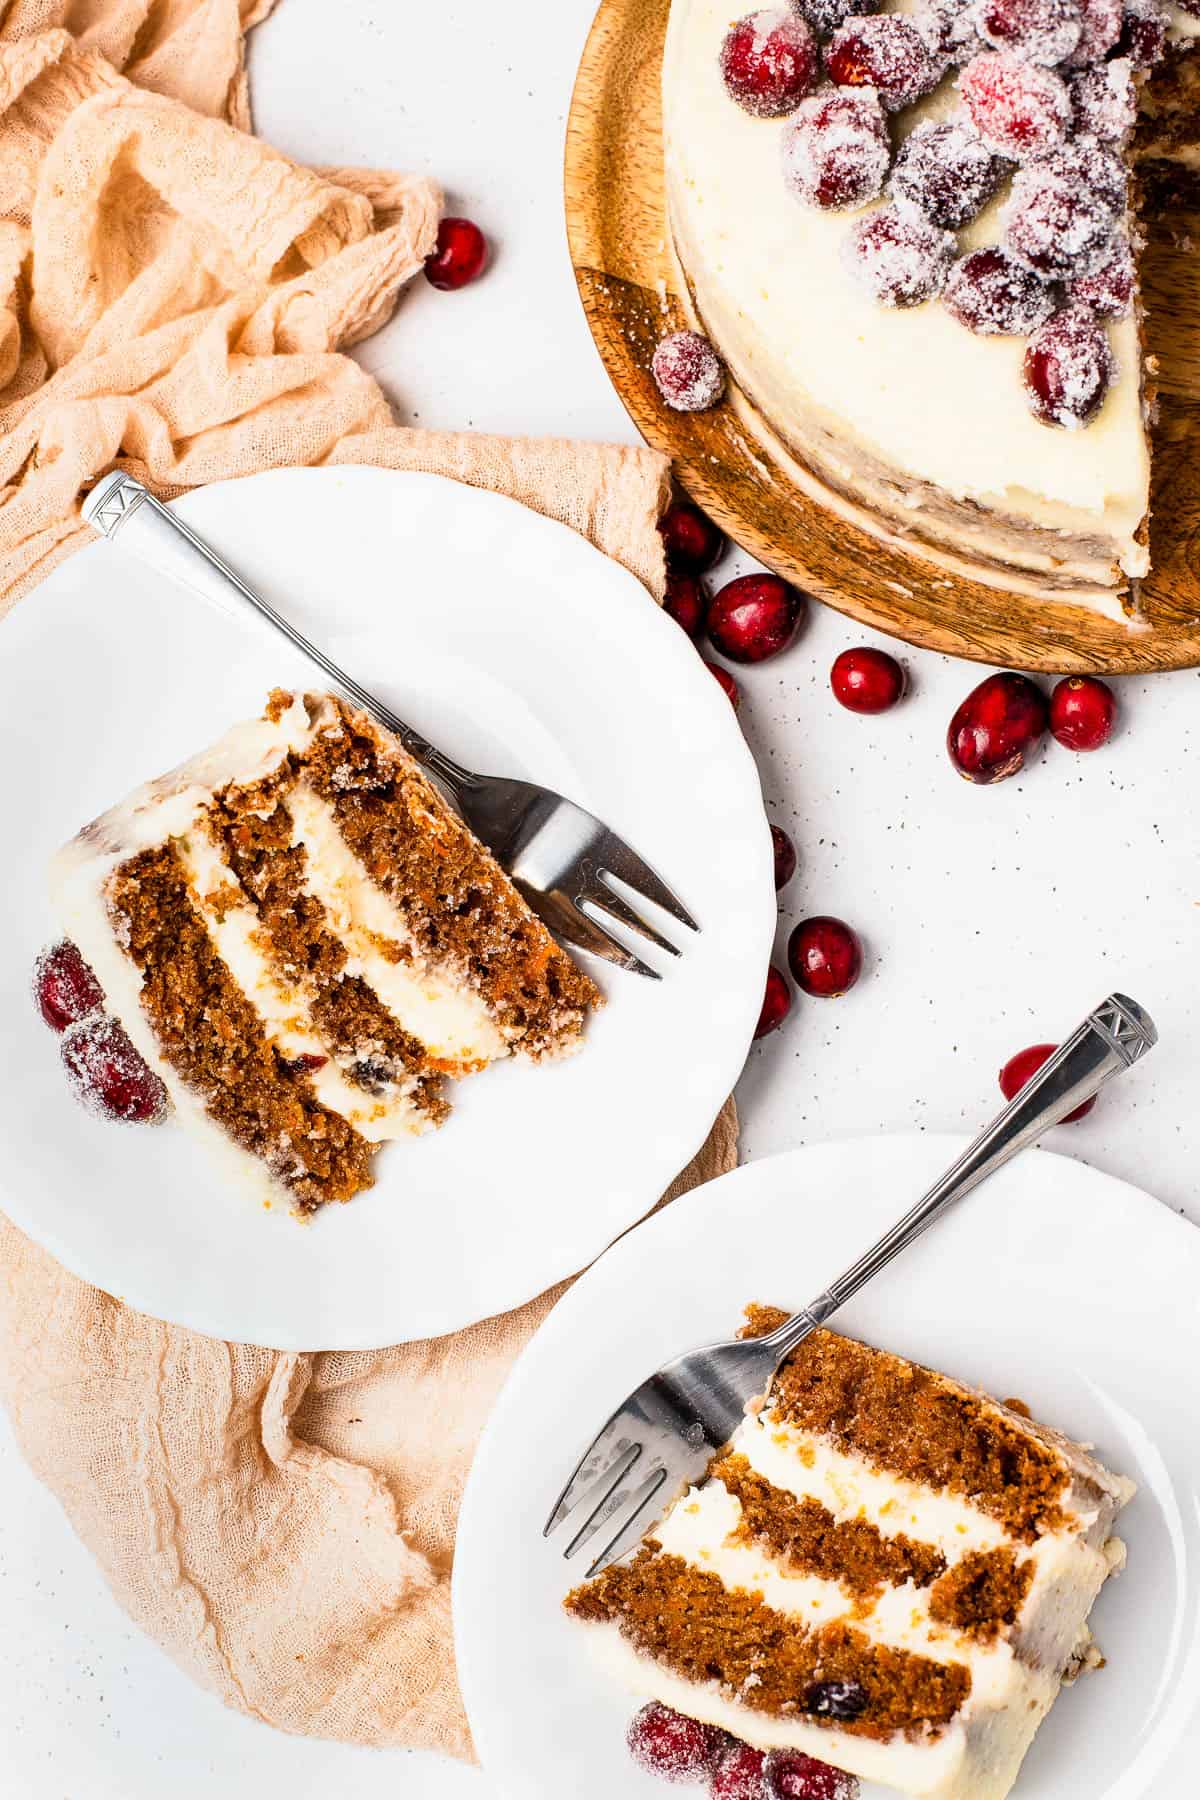 Slices of sugared cranberry layer cake on dessert plates, next to the remaining cake on a cake stand.